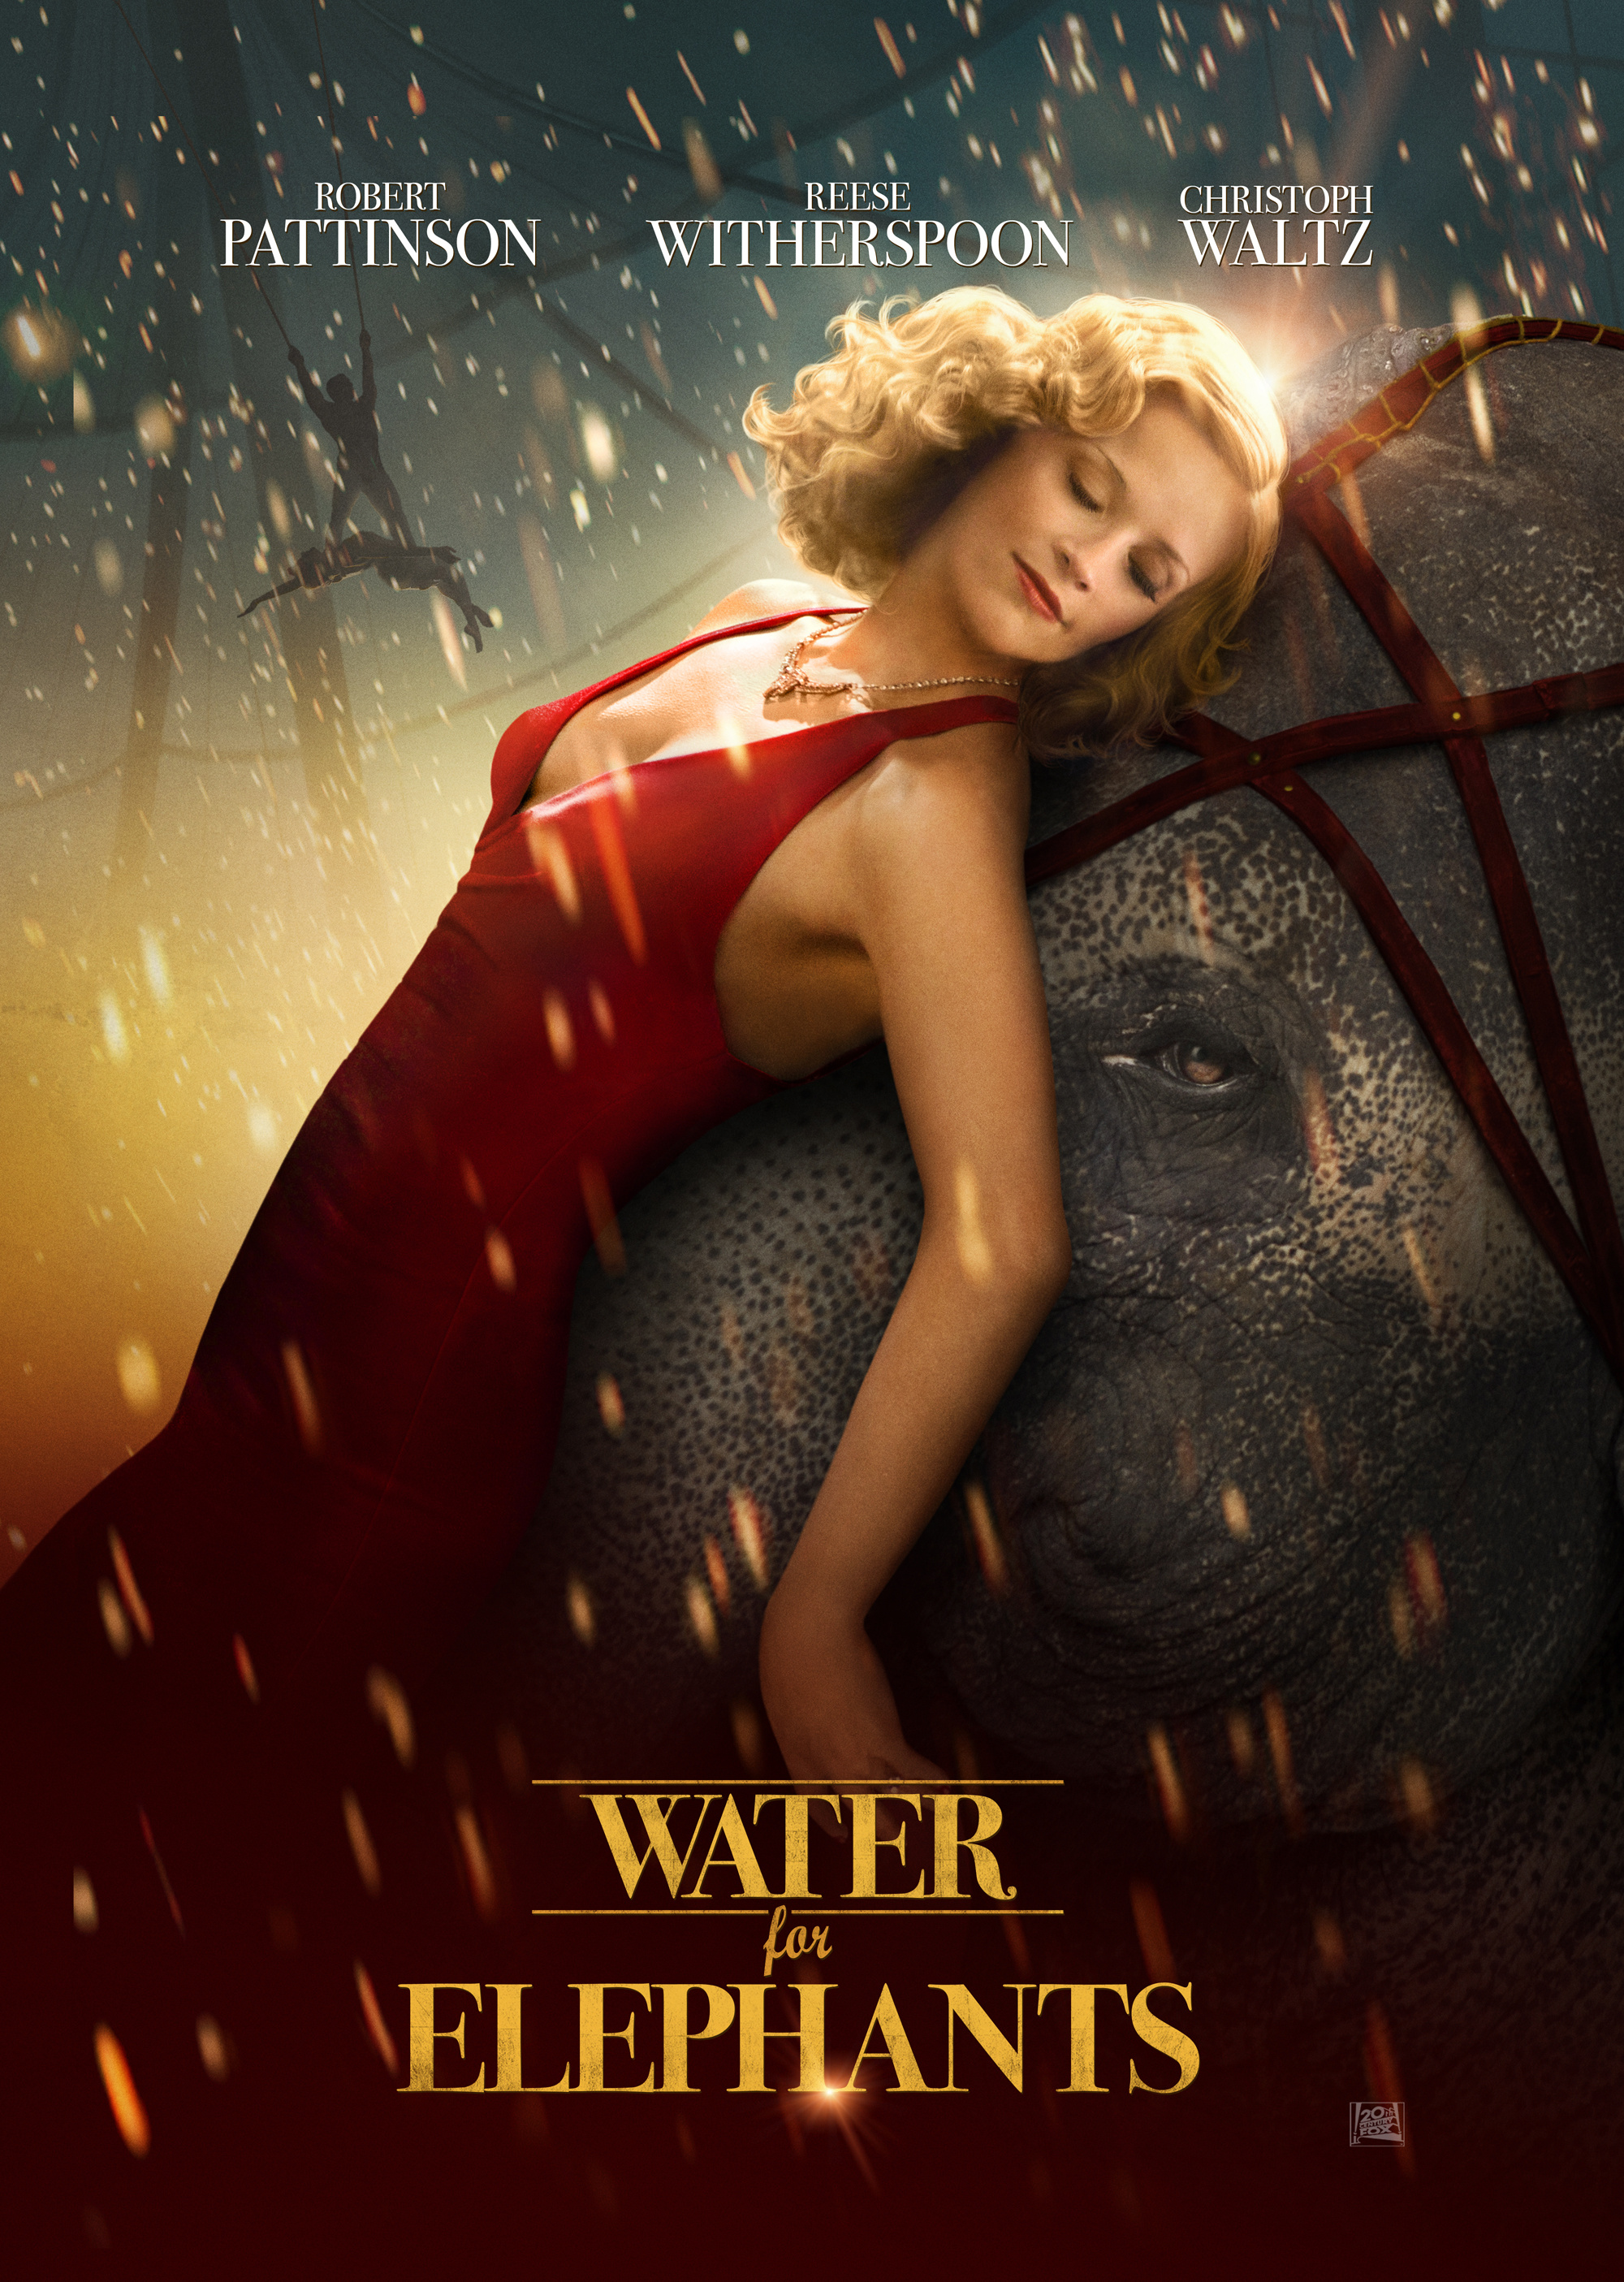 Water for Elephants, High-quality pictures, Movie wallpapers, 4k resolution, 2000x2810 HD Phone